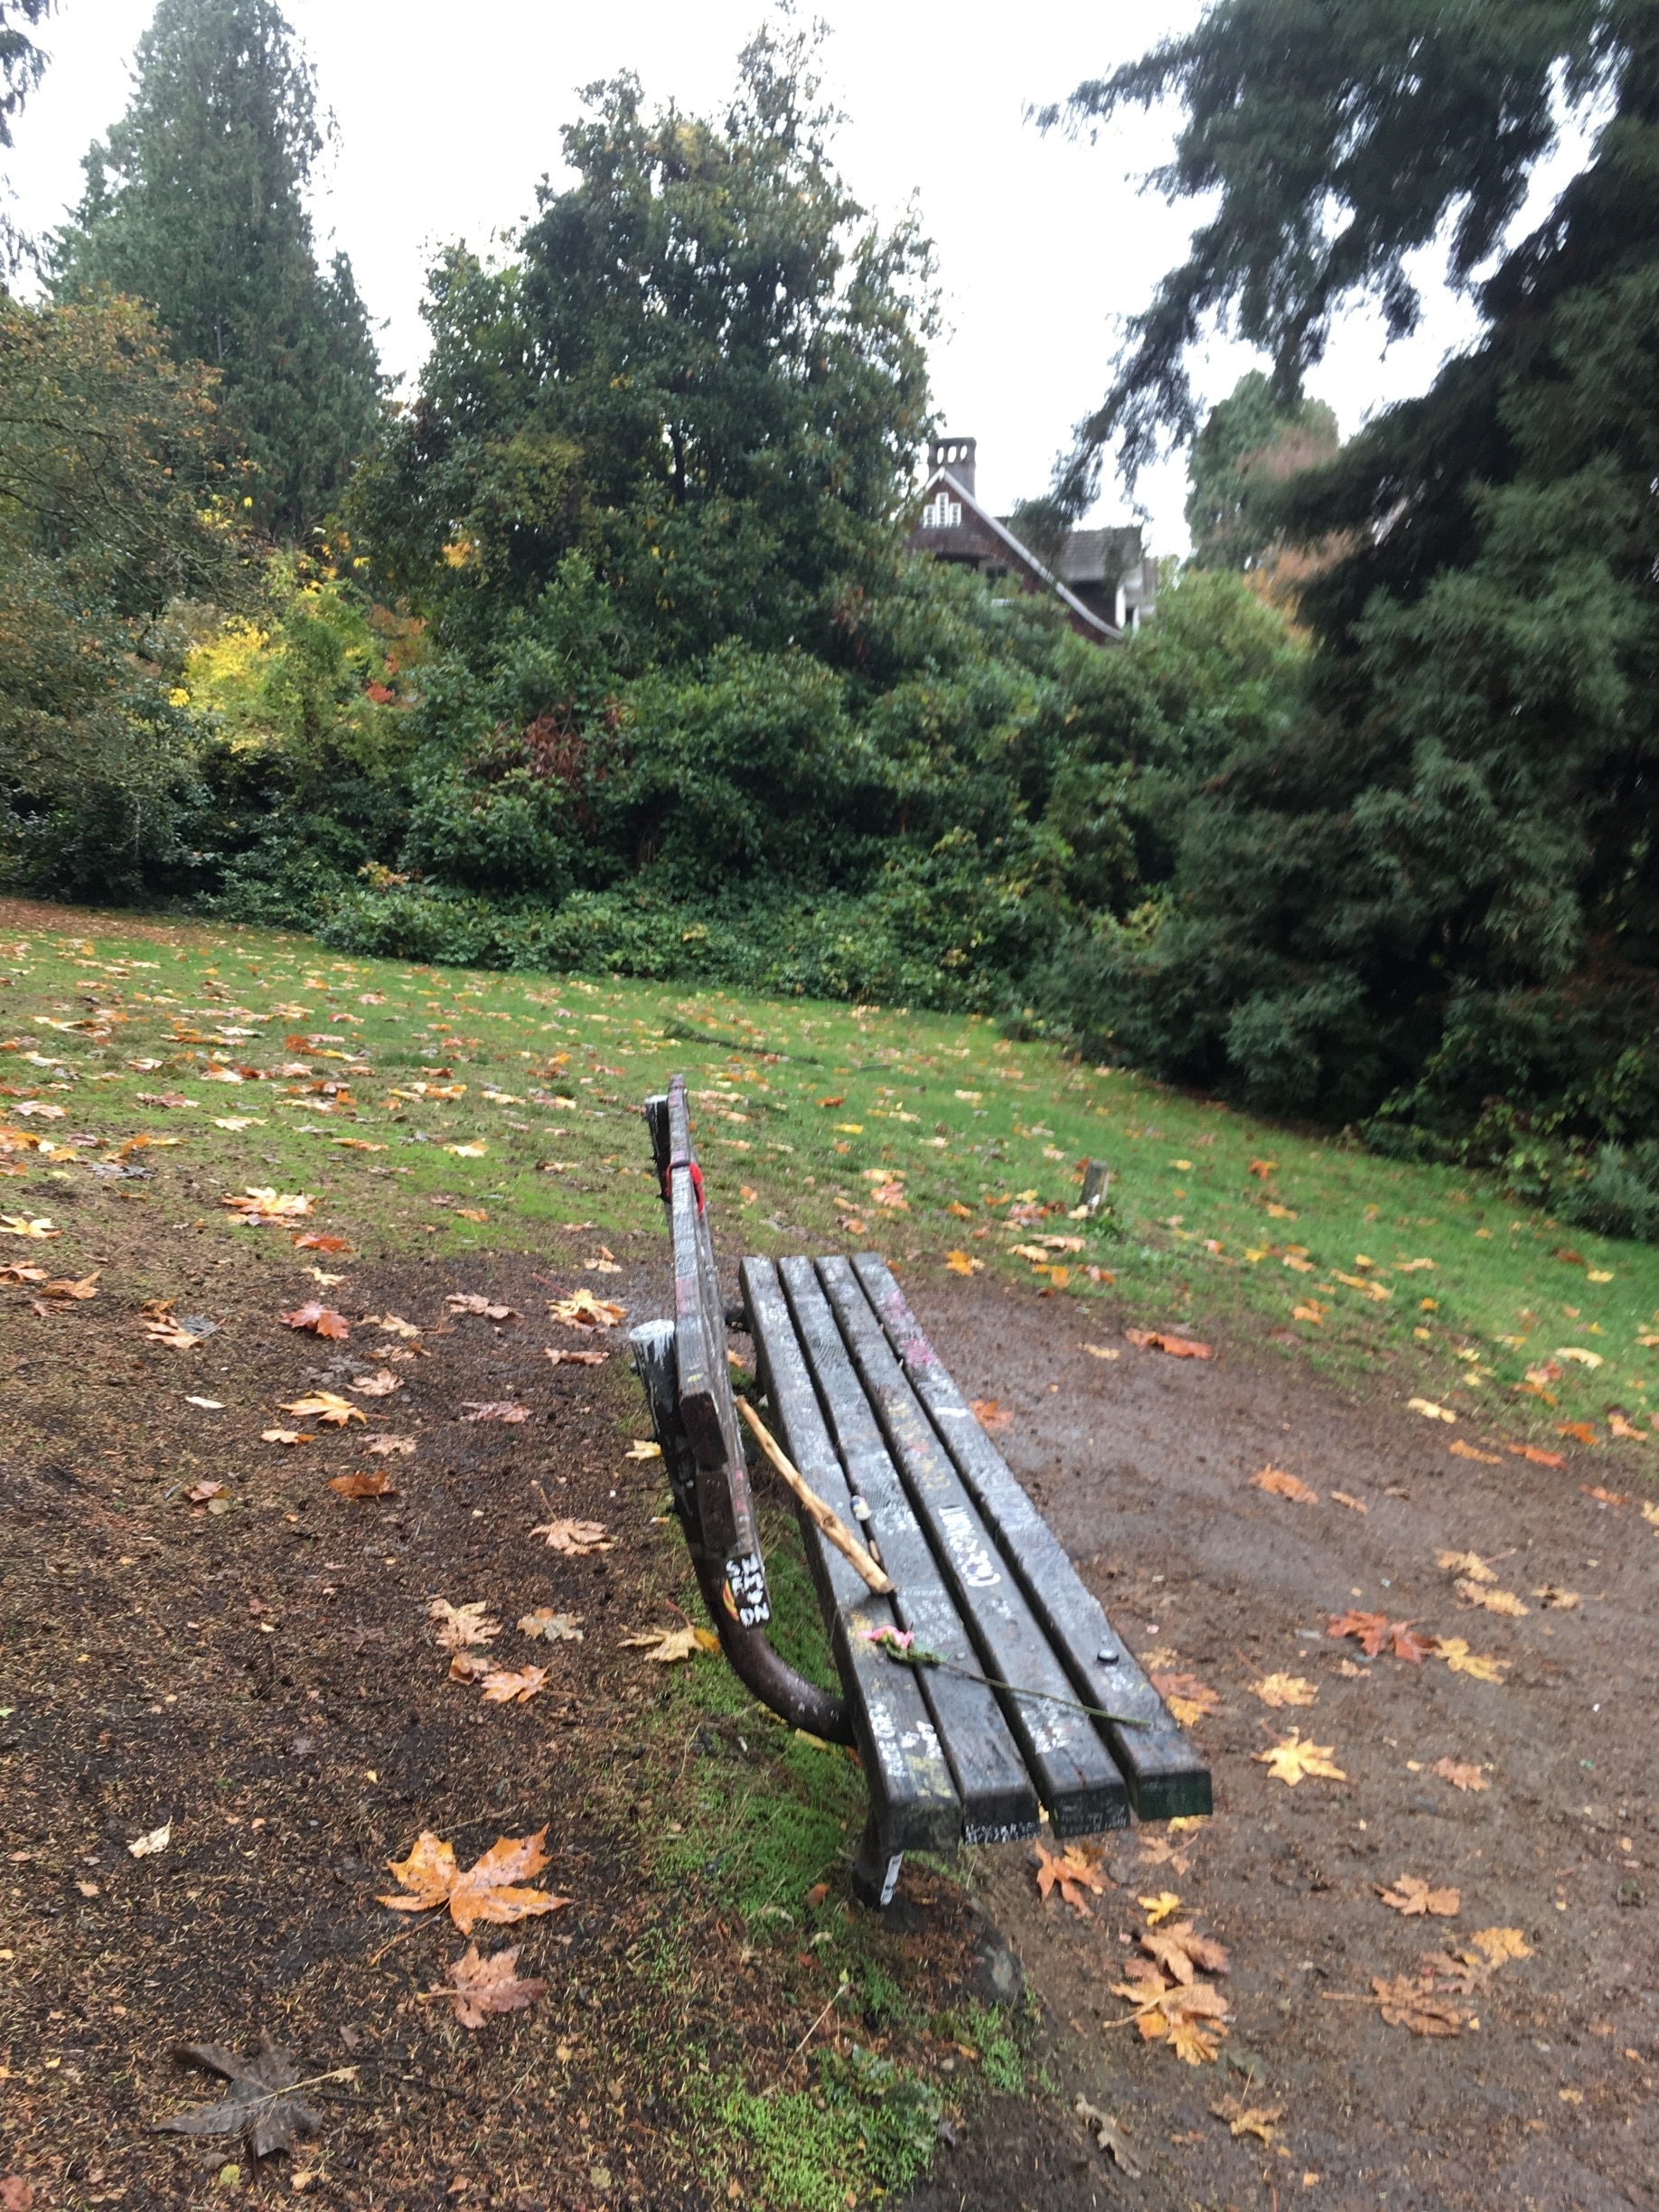 Viretta Park is located to the south of the former home of Kurt Cobain, where he died. Nirvana fans gather at the park on the anniversary of Cobain's death (April 5), and to a lesser extent on his birthday (Feb 20), to pay tribute to the musician.

The park's wooden benches, serving as the de facto memorial to Kurt Cobain in Seattle, are covered with graffiti messages to the rock icon. There has been much speculation over the years on whether the name of the park should be changed to "Kurt's Park", due to the late rock icons large fan base.